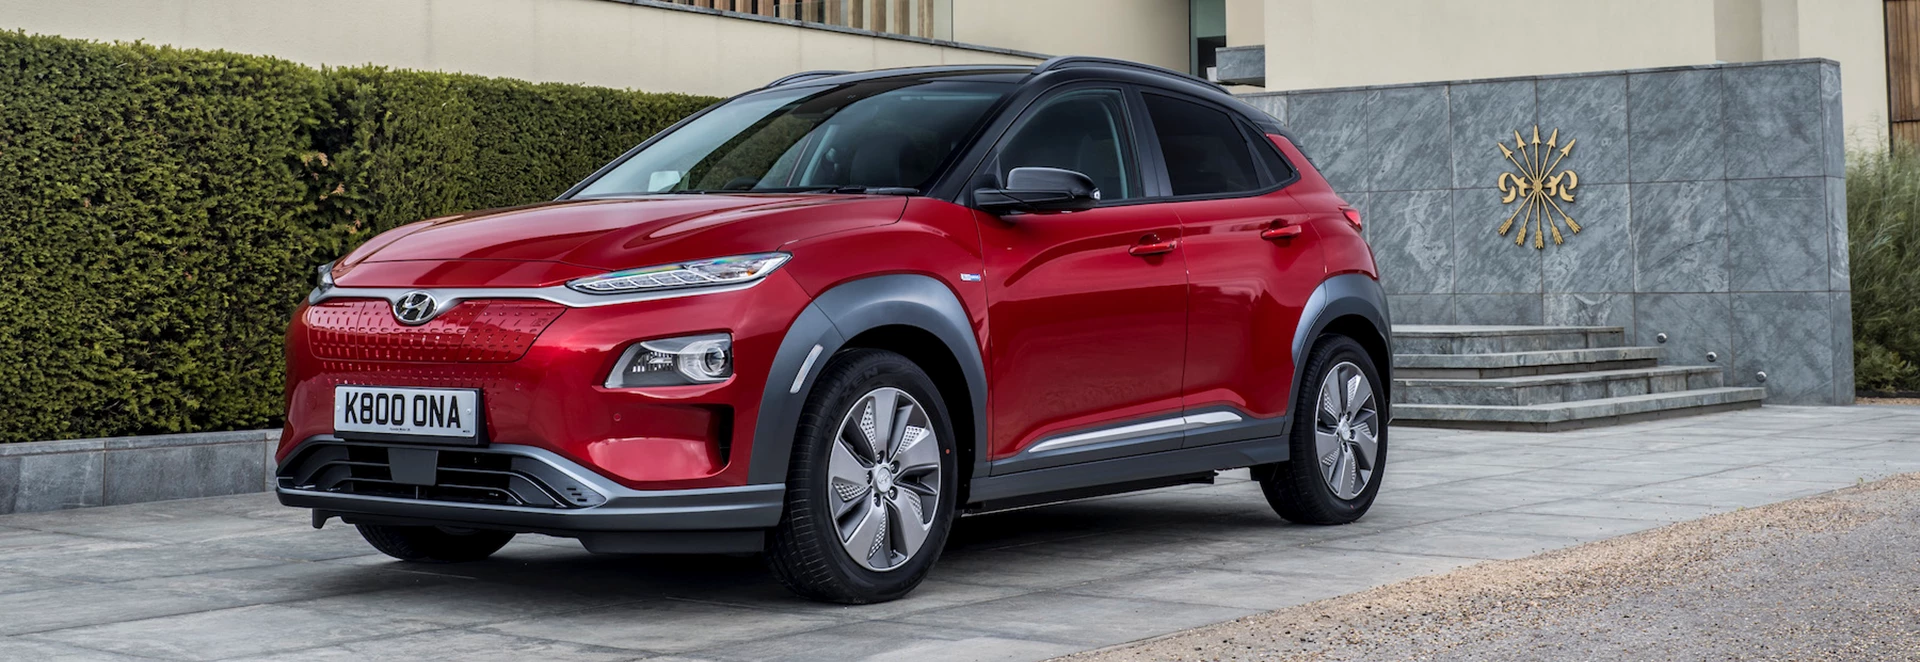 Hyundai to ‘significantly ramp up’ availability of KONA Electric